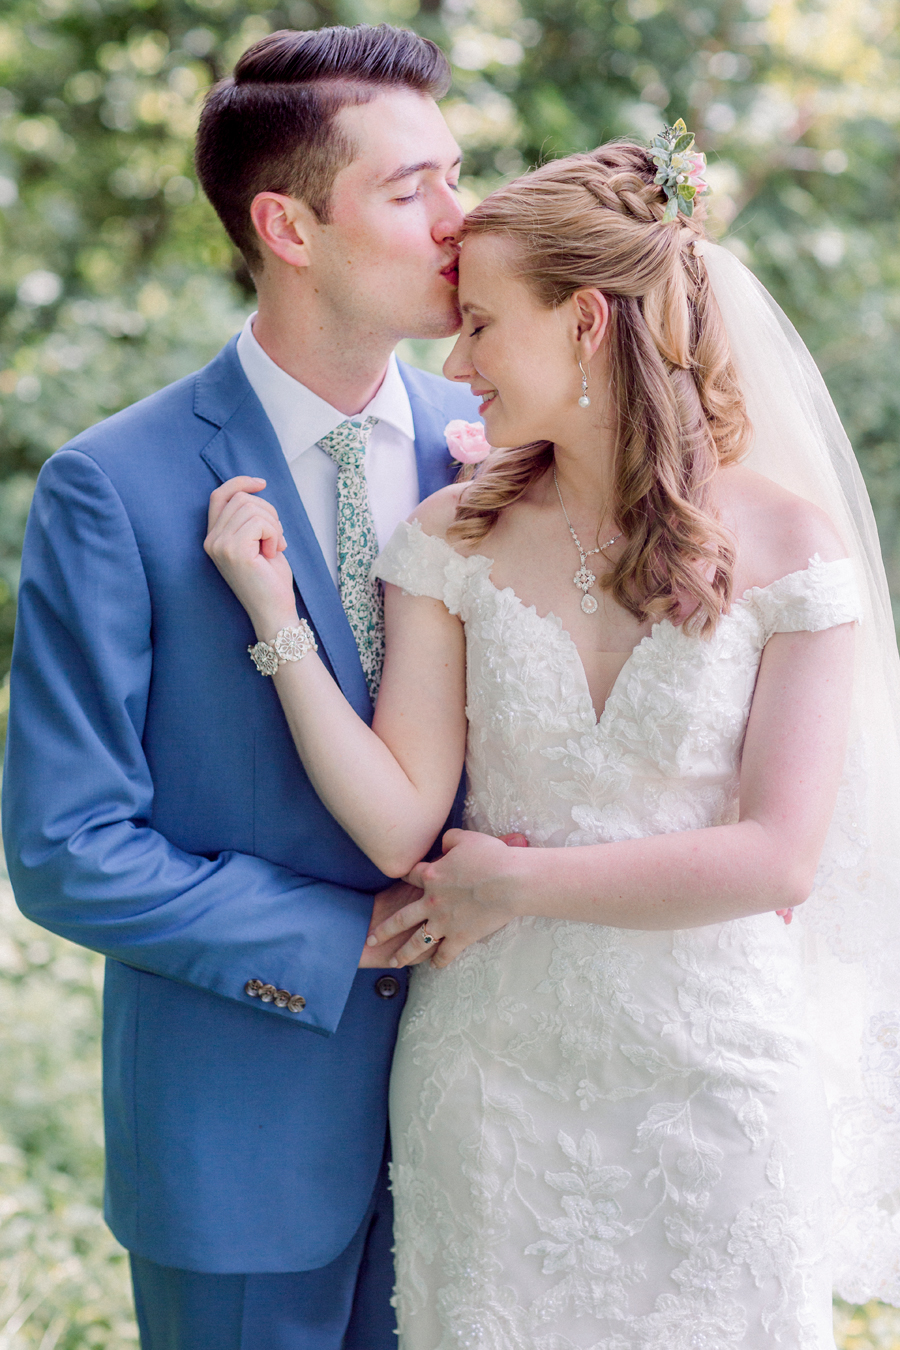 The groom kisses the bride's forehead at a Blue Bell Farm wedding by Love Tree Studios.